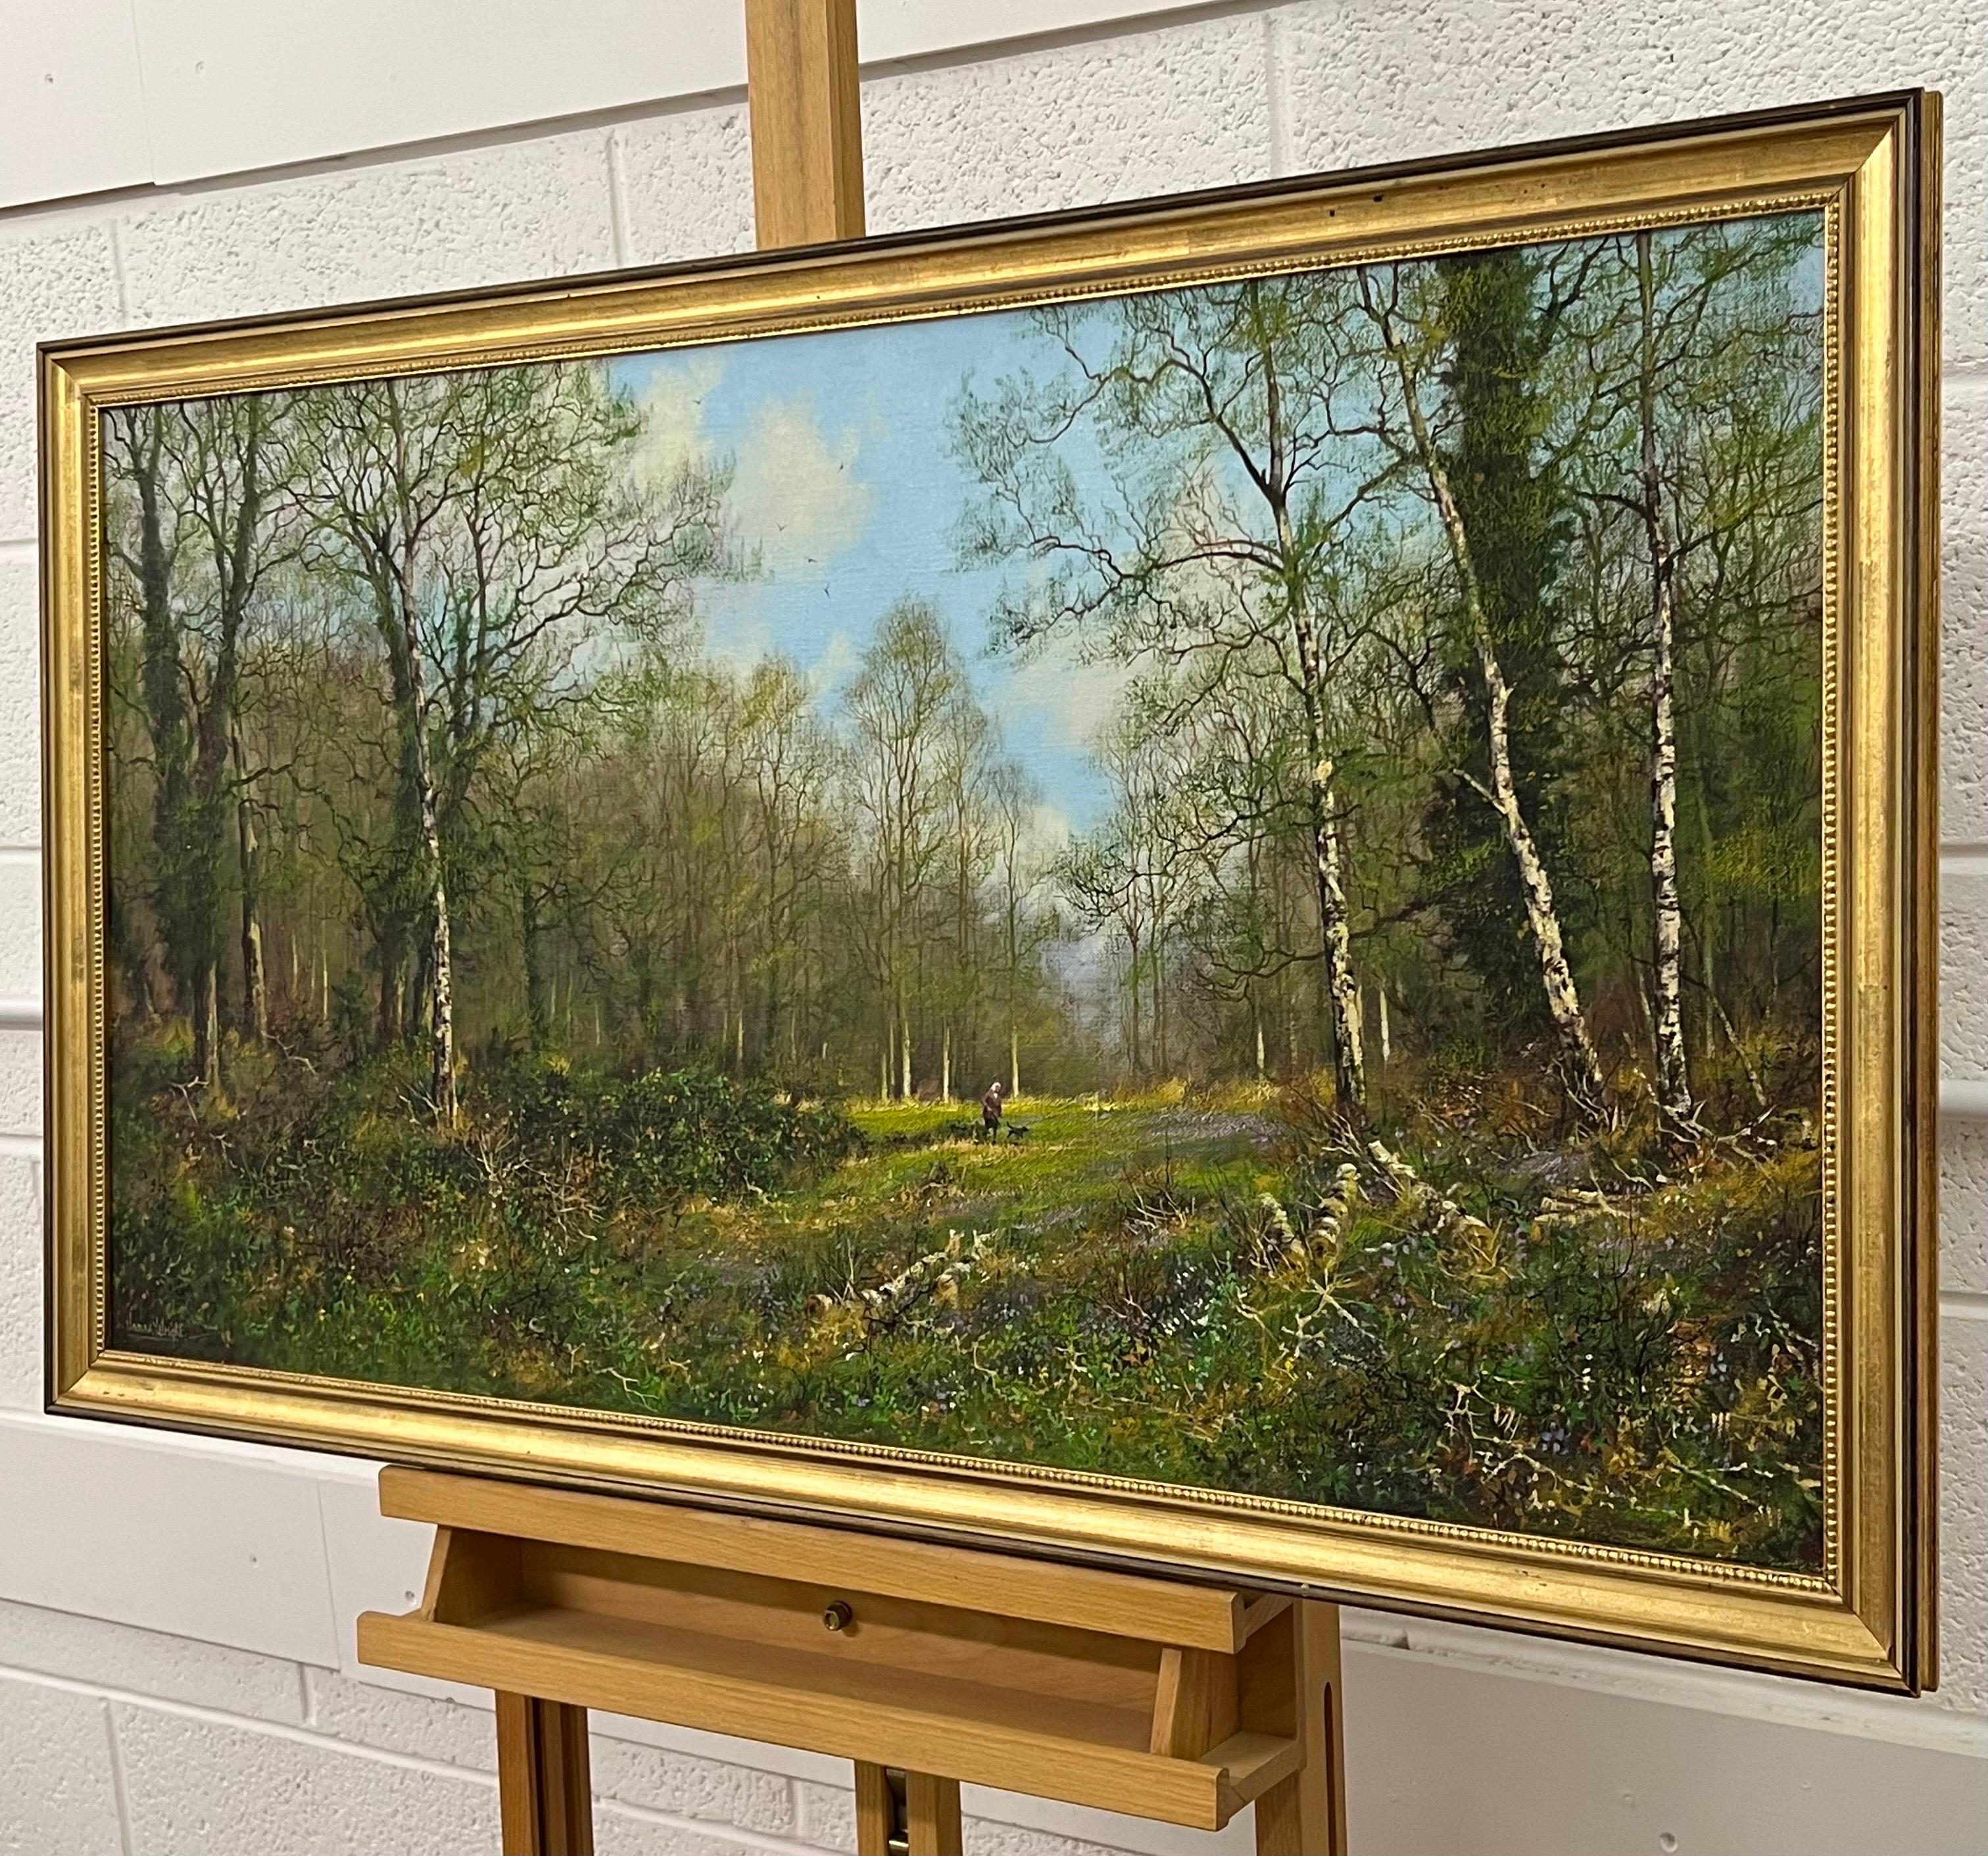 Oil Painting of a Dog Walk in a Silver Birch Woodland in the English Countryside, by 20th Century Modern British Artist, James Wright 

Art measures 30 x 16 inches
Frame measures 36 x 22 inches 

This 1980's vintage painting depicts a figure walking